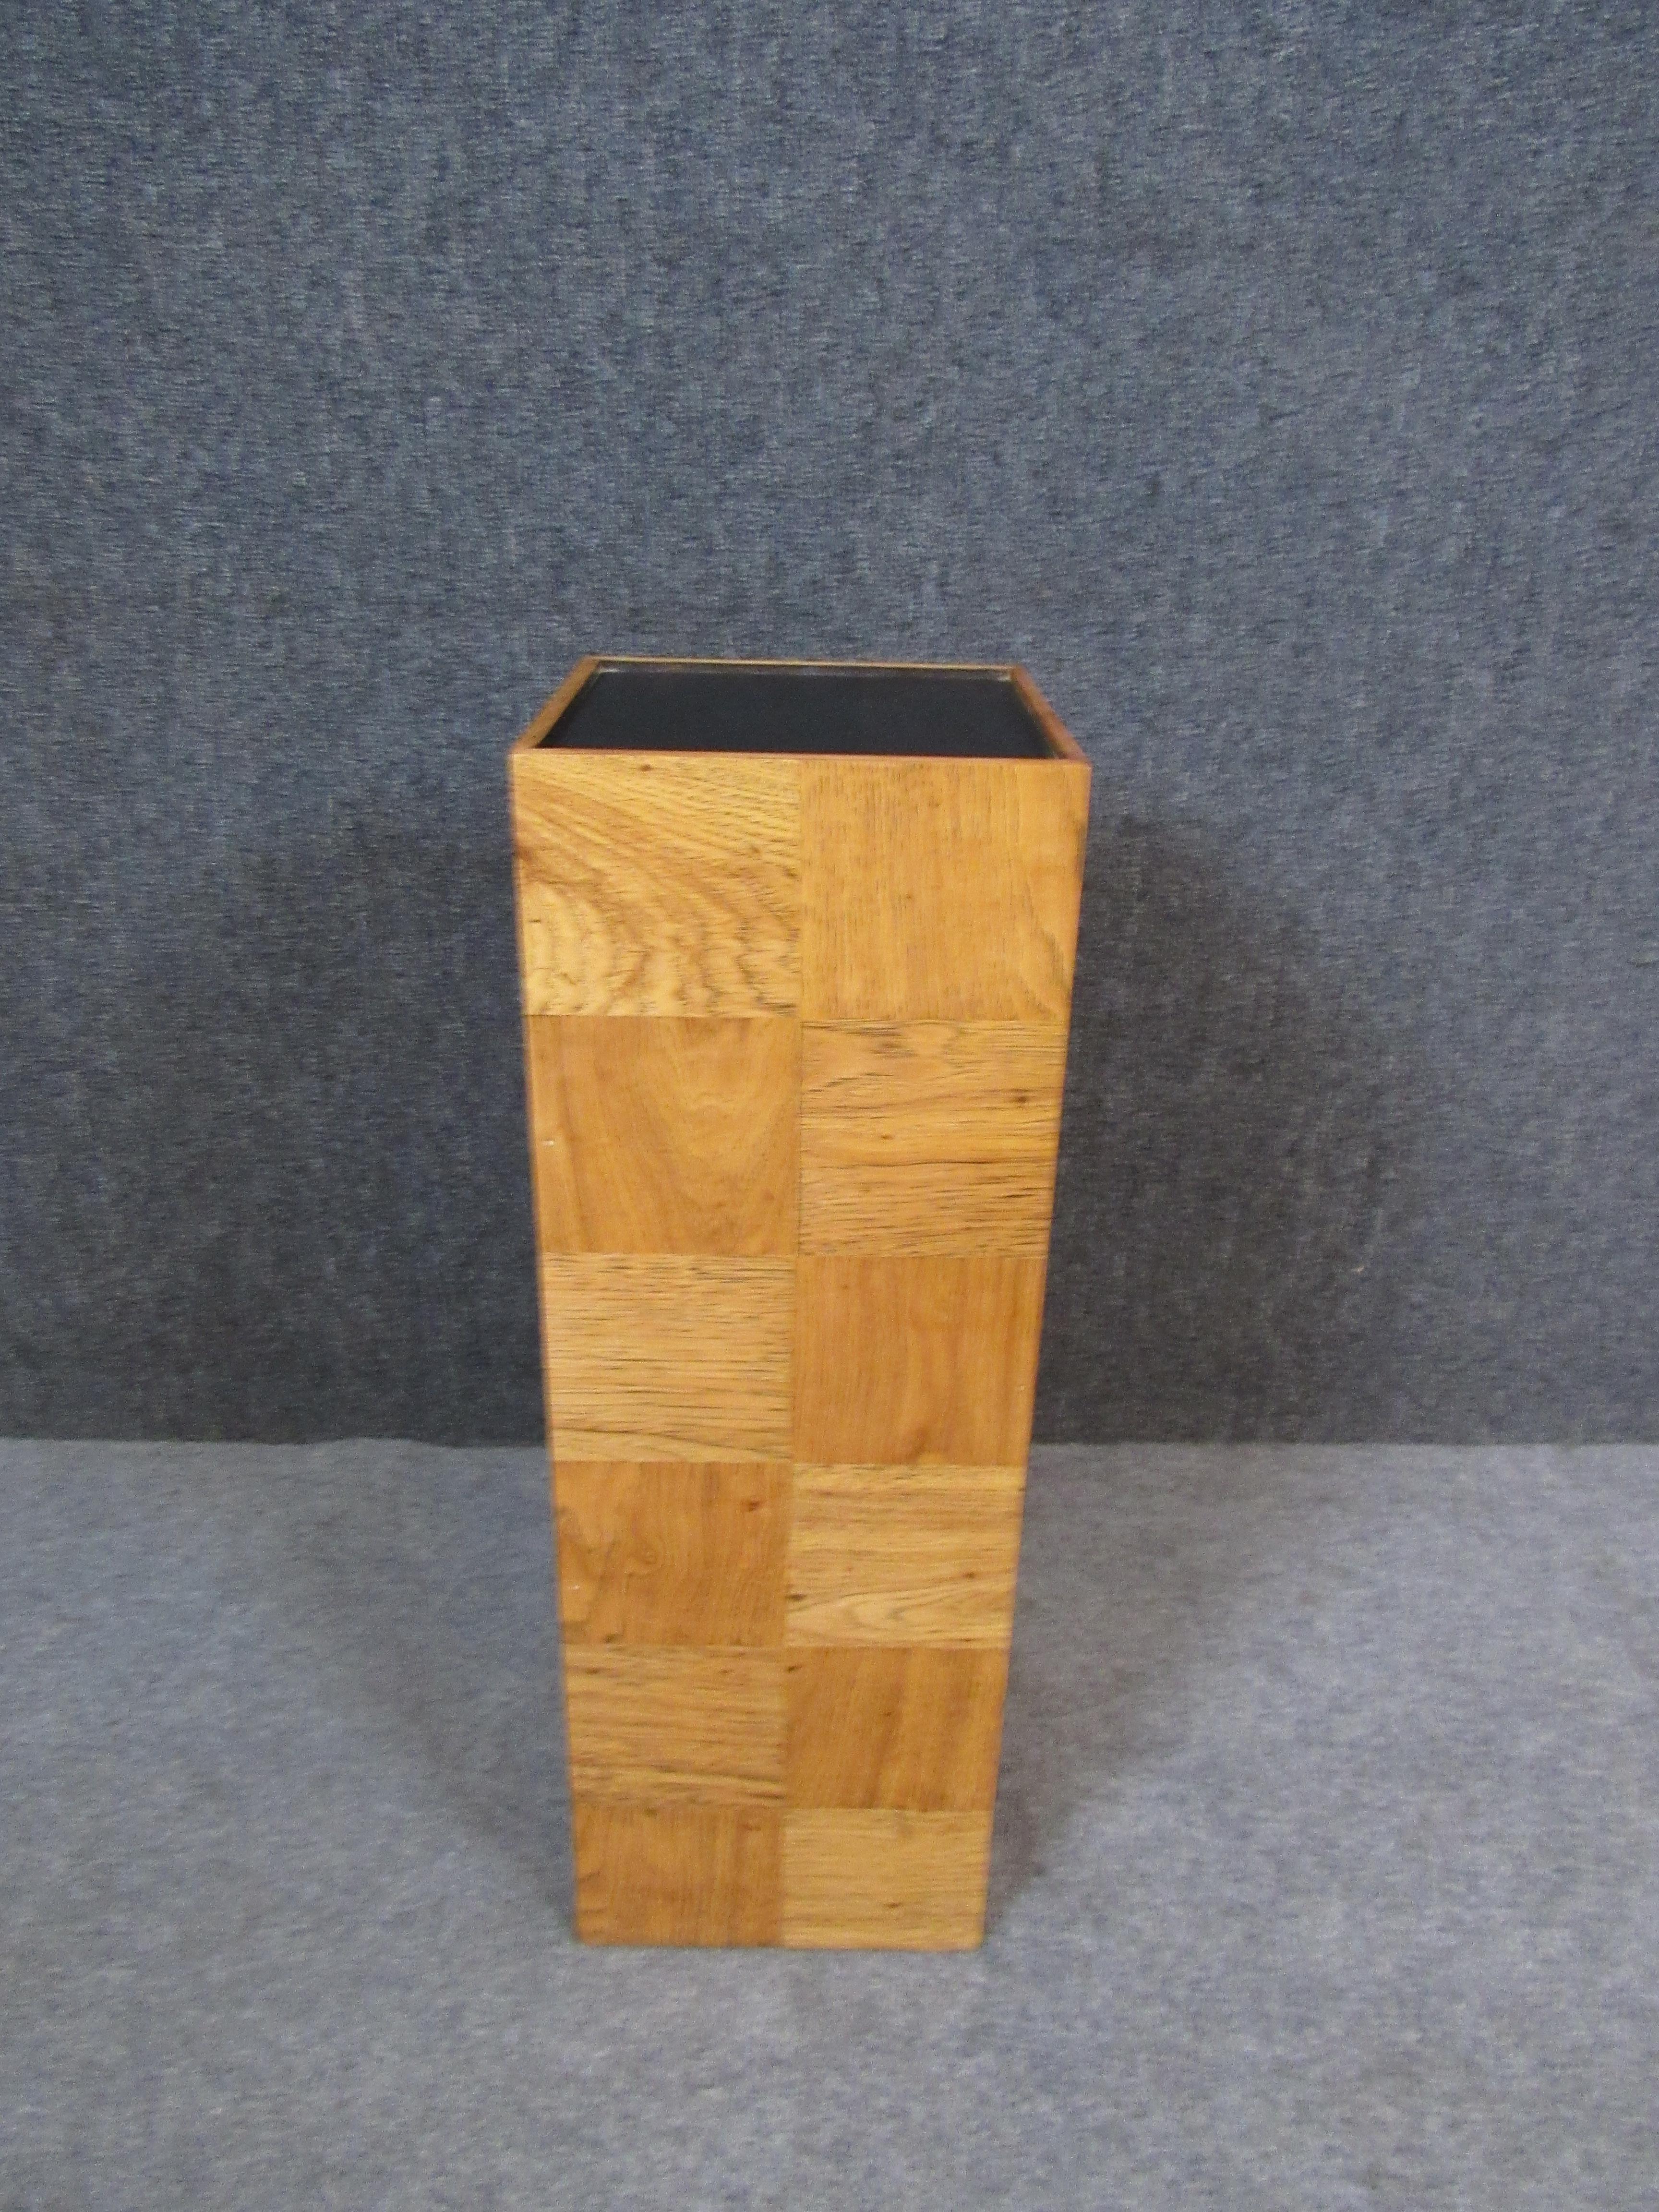 Terrific vintage patchwork veneer pedestal in the unmistakable style of Milo Baughman for Thayer Coggin.  A sturdy 10